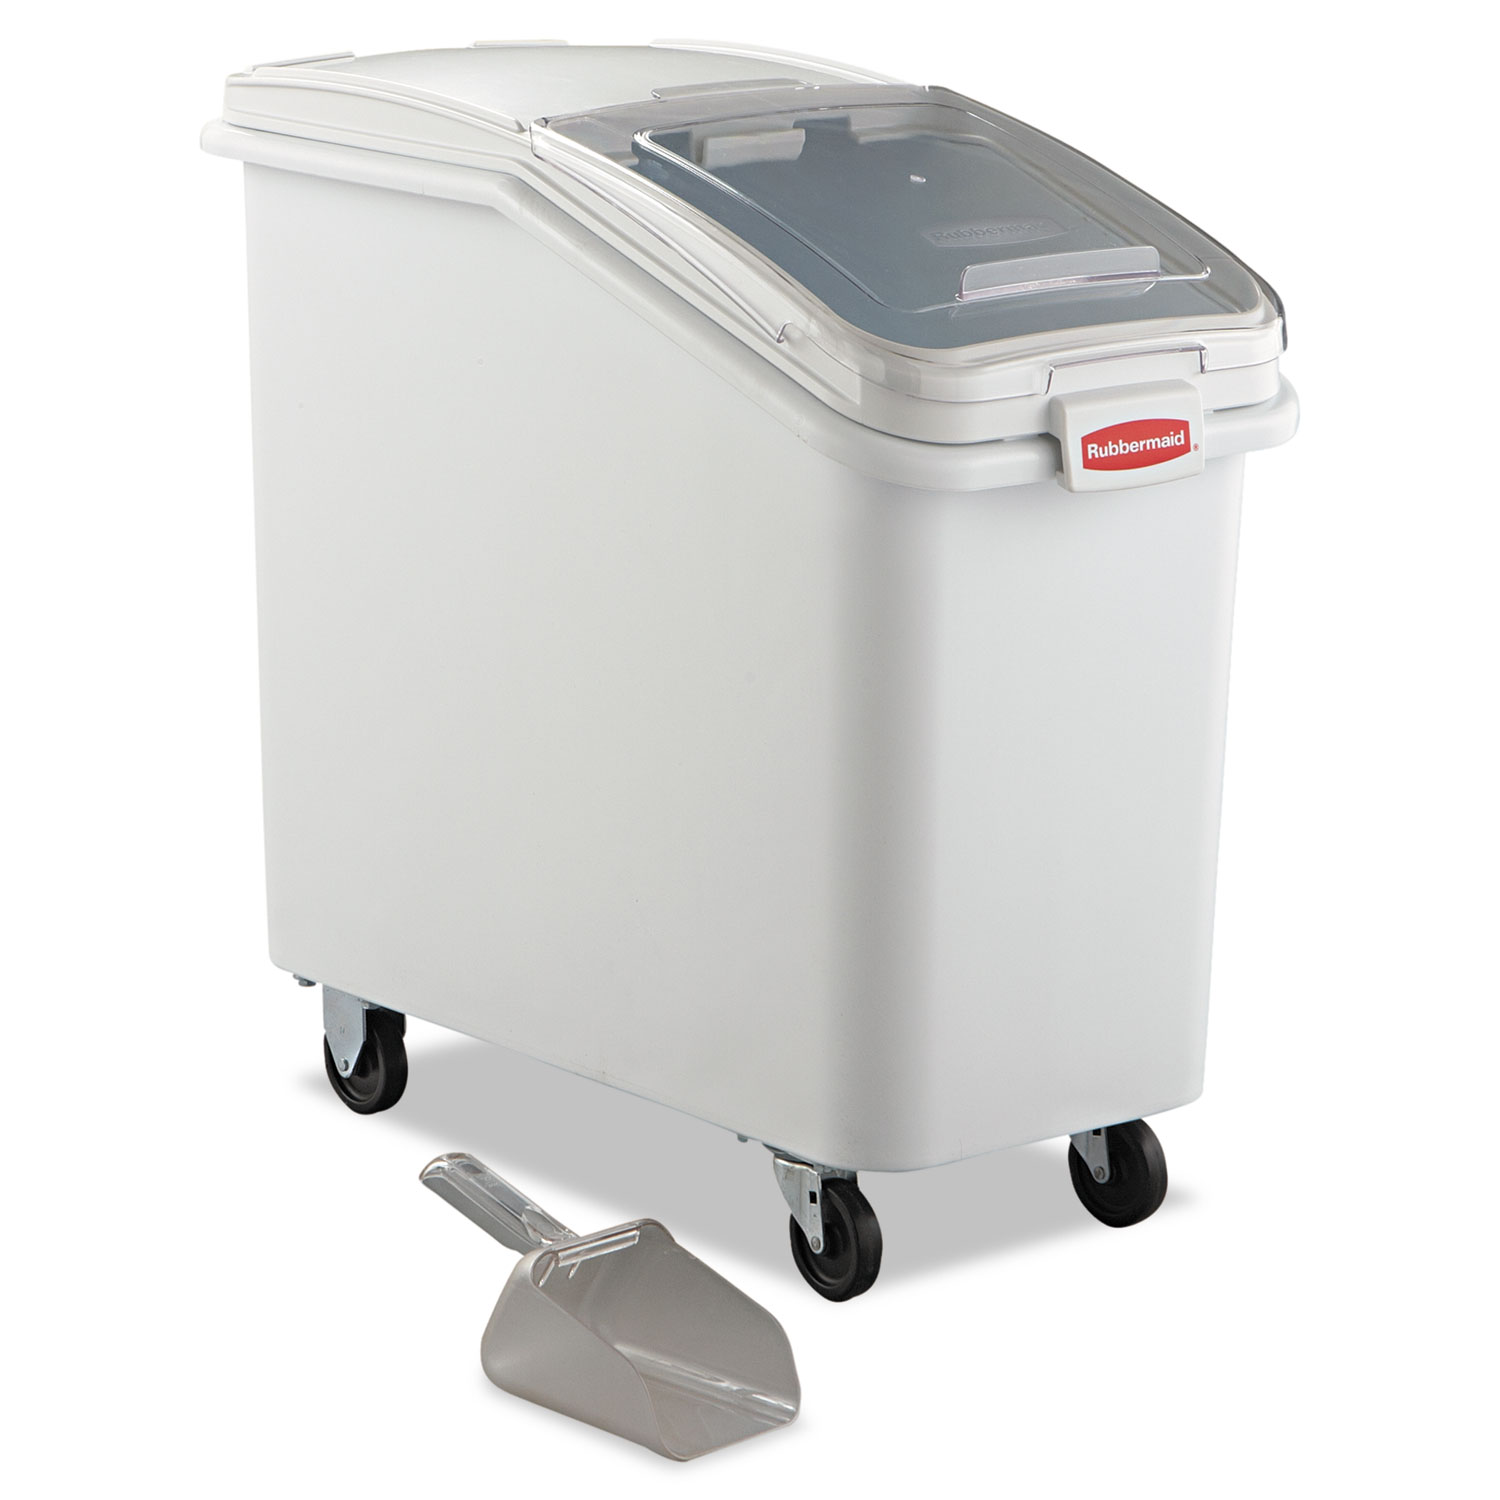  Rubbermaid Commercial 3602-88-WHT ProSave Mobile Ingredient Bin, 26.18gal, 15 1/2w x 29 1/2d x 28h, White (RCP360288WHI) 